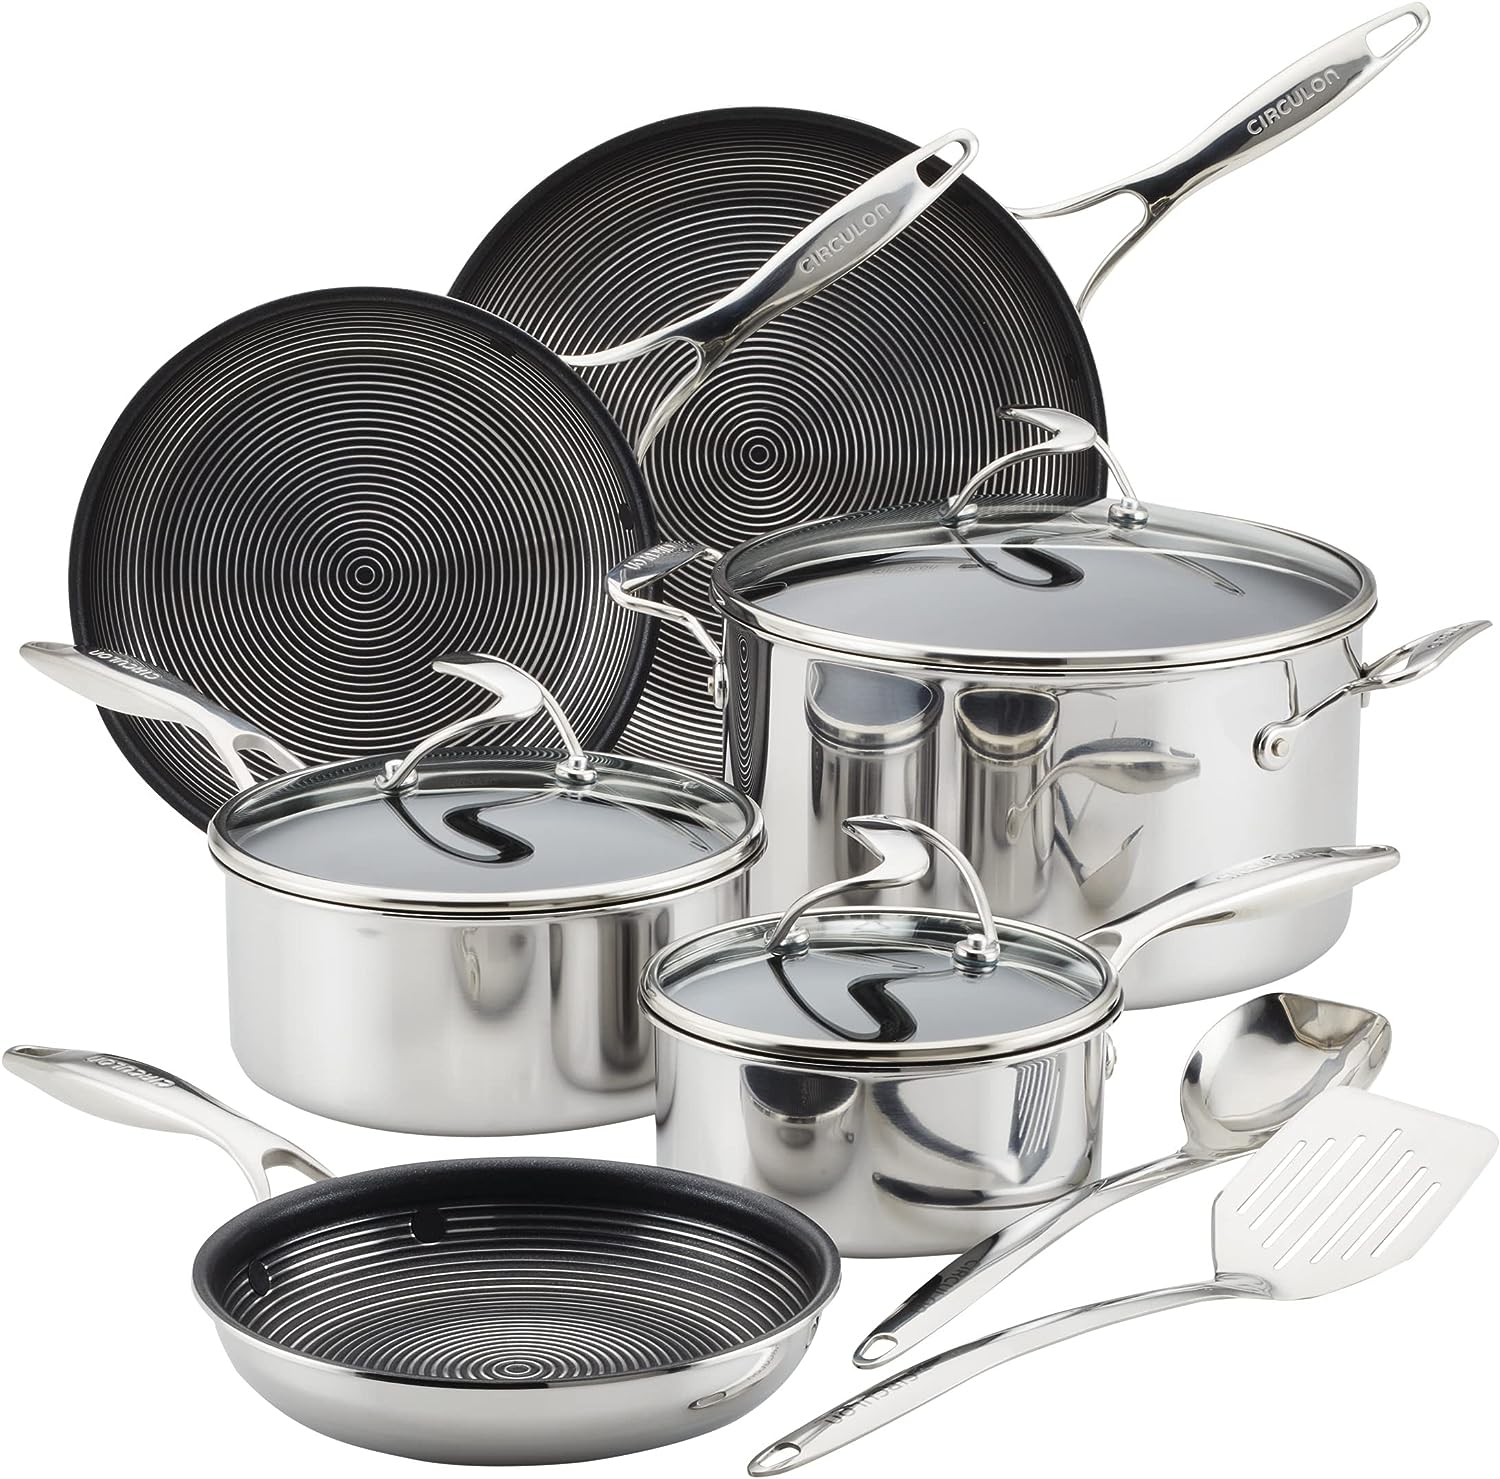 https://bigbigmart.com/wp-content/uploads/2023/09/Circulon-Clad-Stainless-Steel-Cookware-Pots-and-Pans-and-Utensil-Set-with-Hybrid-SteelShield-and-Nonstick-Technology-11-Piece-Silver.jpg